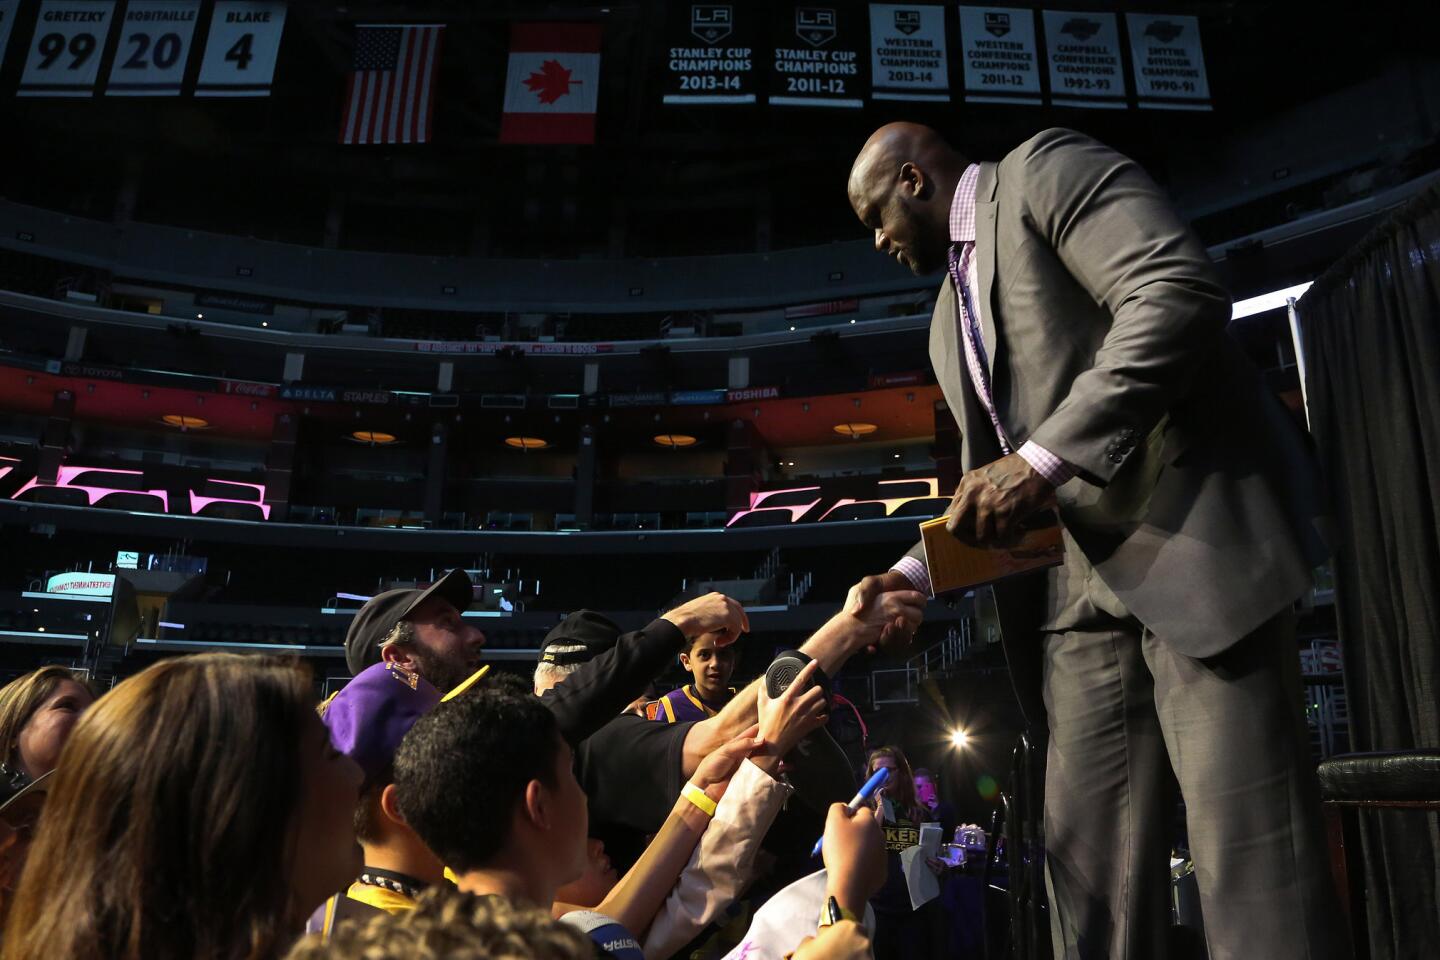 Shaquille O'Neal, who wasn't always so kind, speaks lovingly of Lakers, L.A. and the Buss family